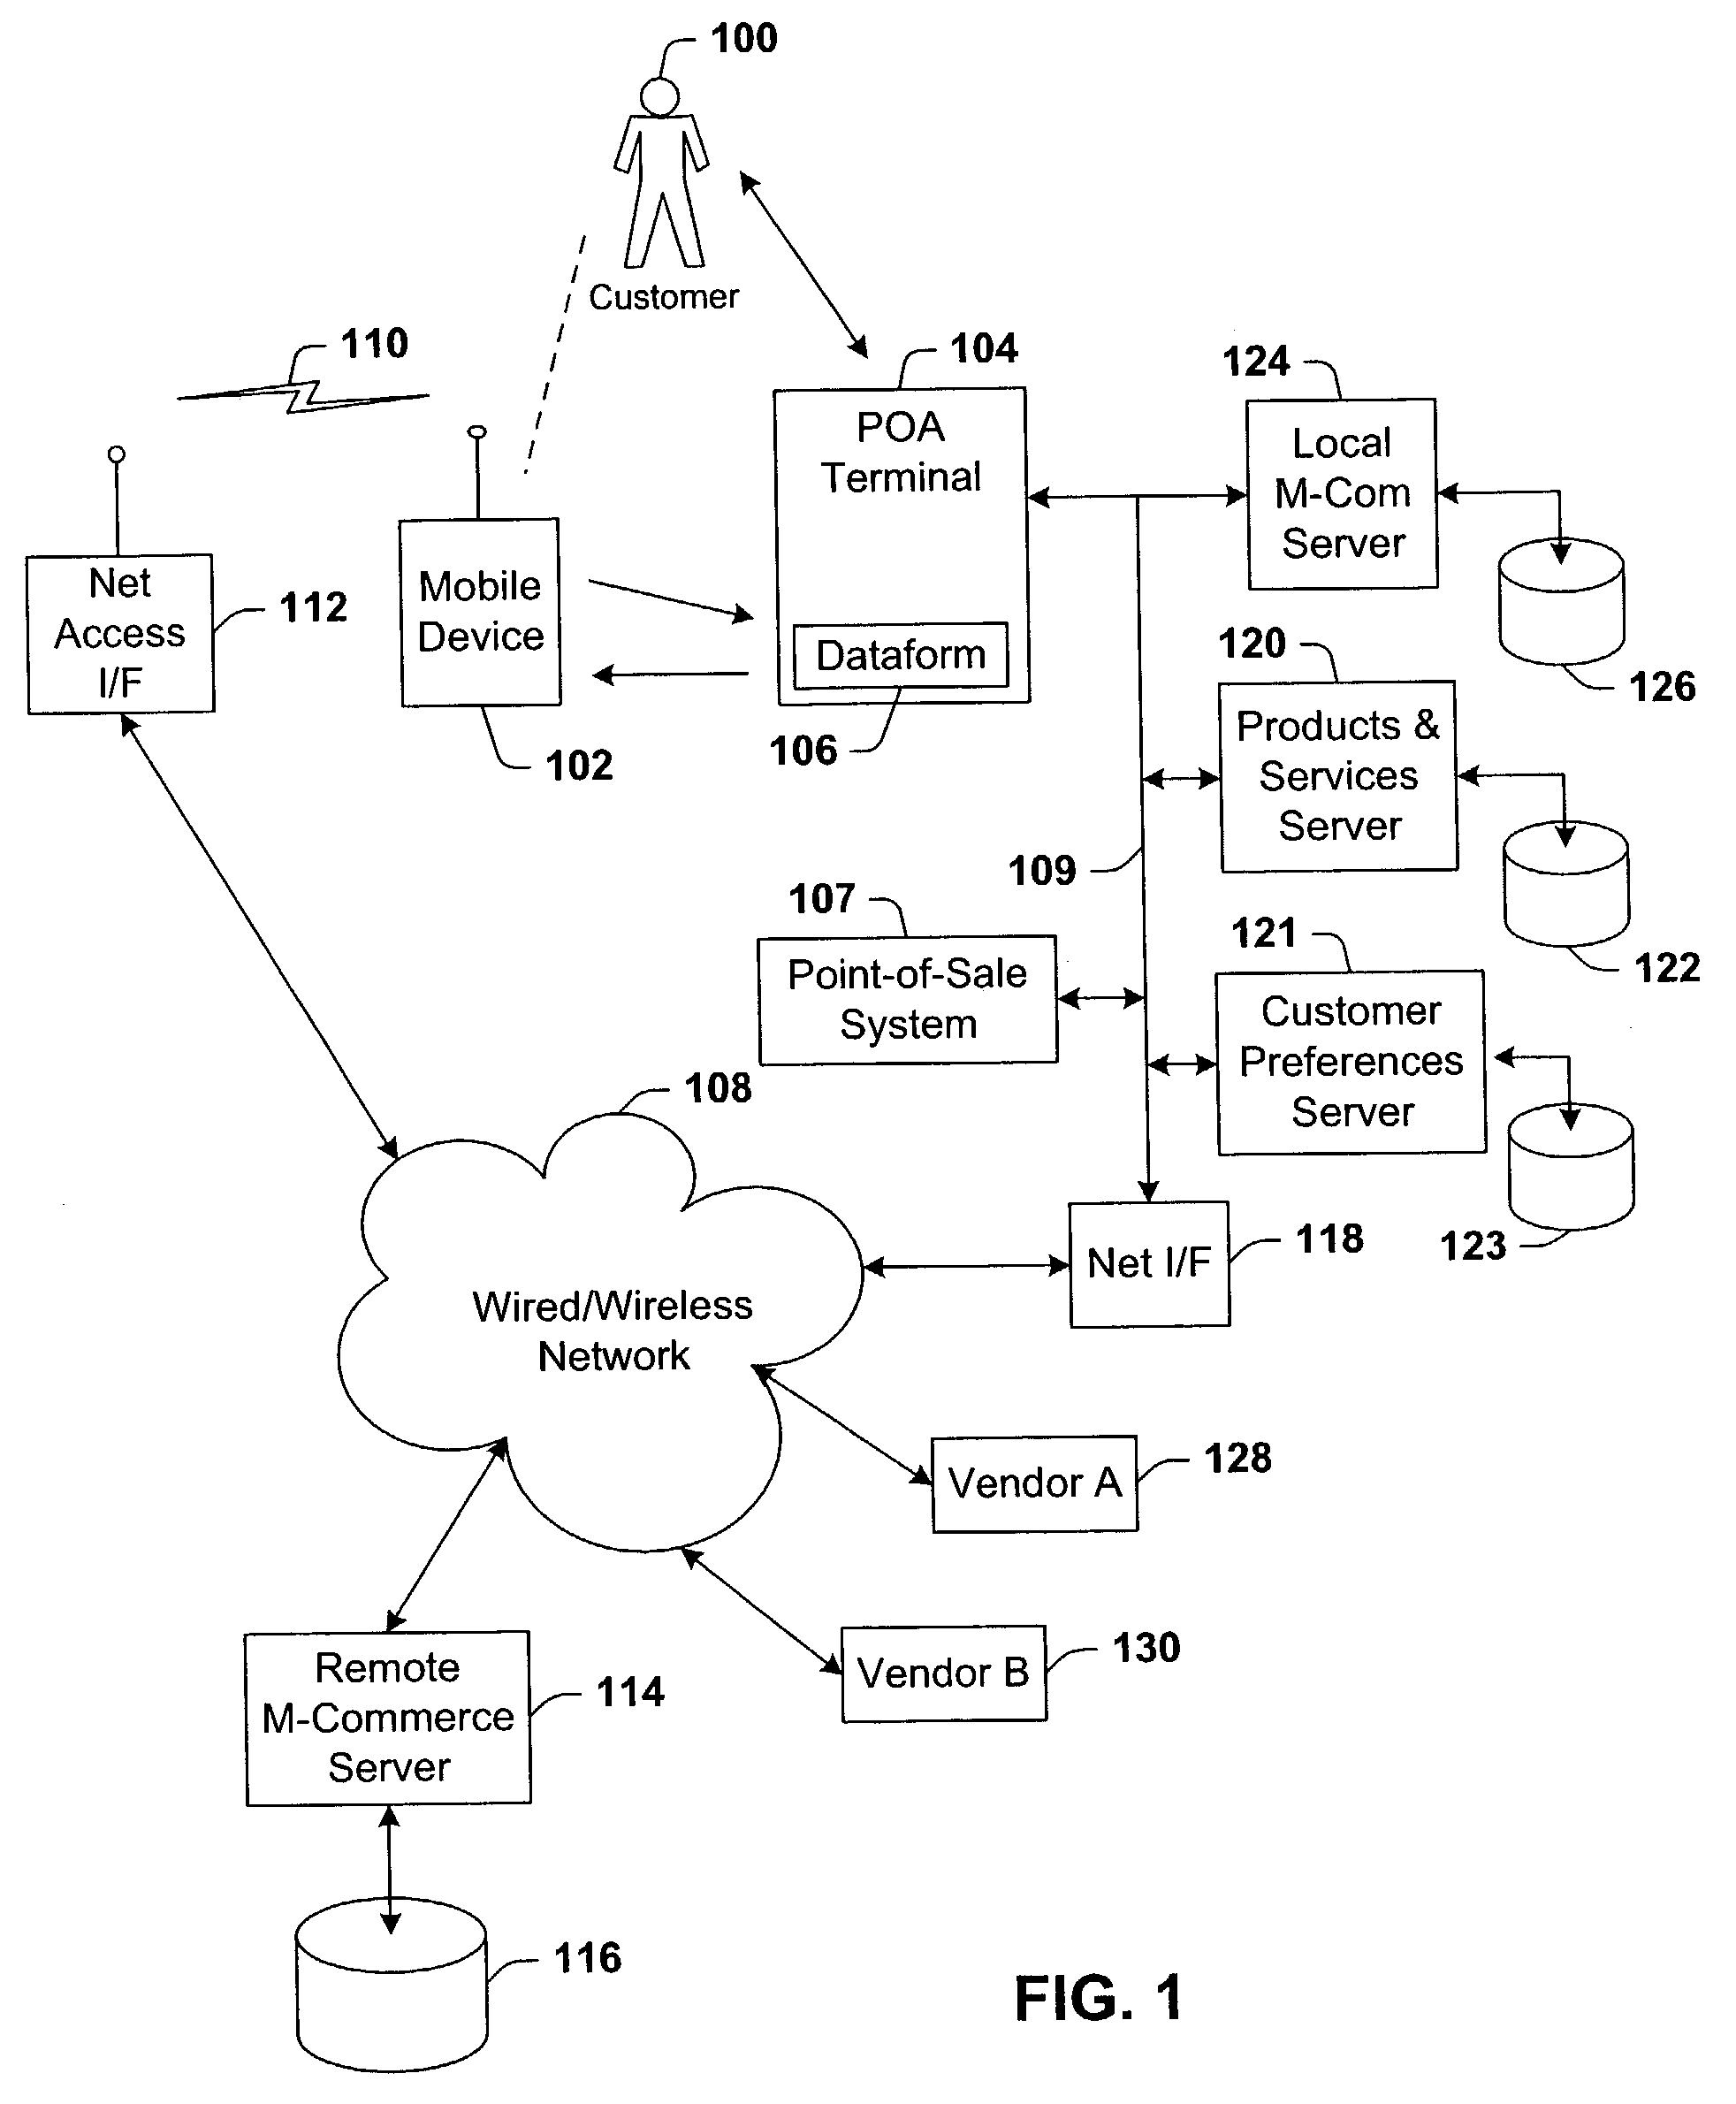 System for communicating product and service related information to a user based on direction of movement